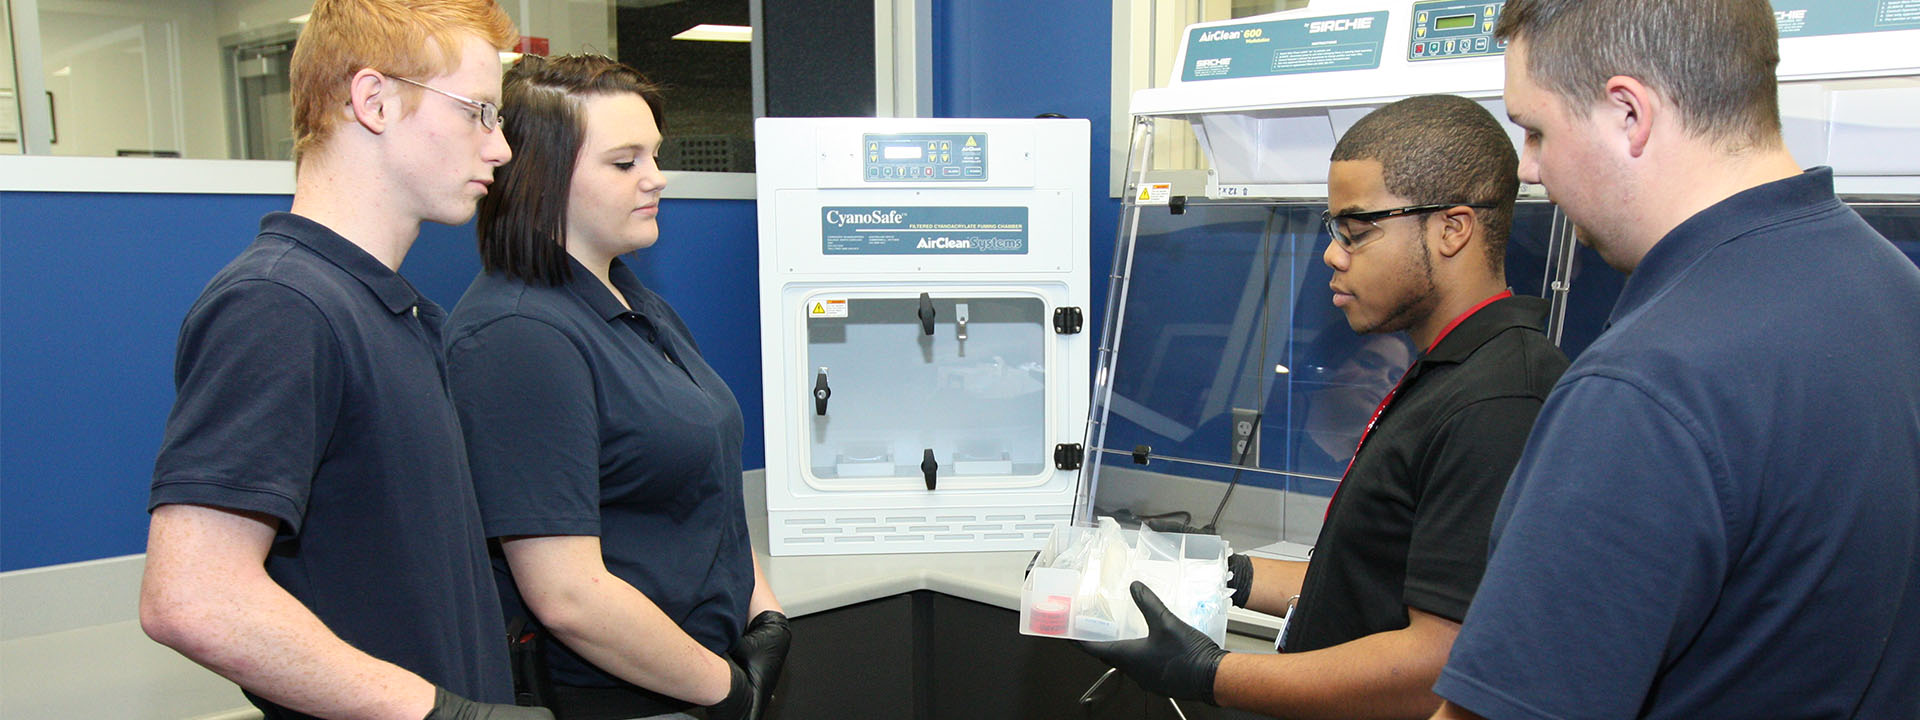 Criminal Justice students work with equipment